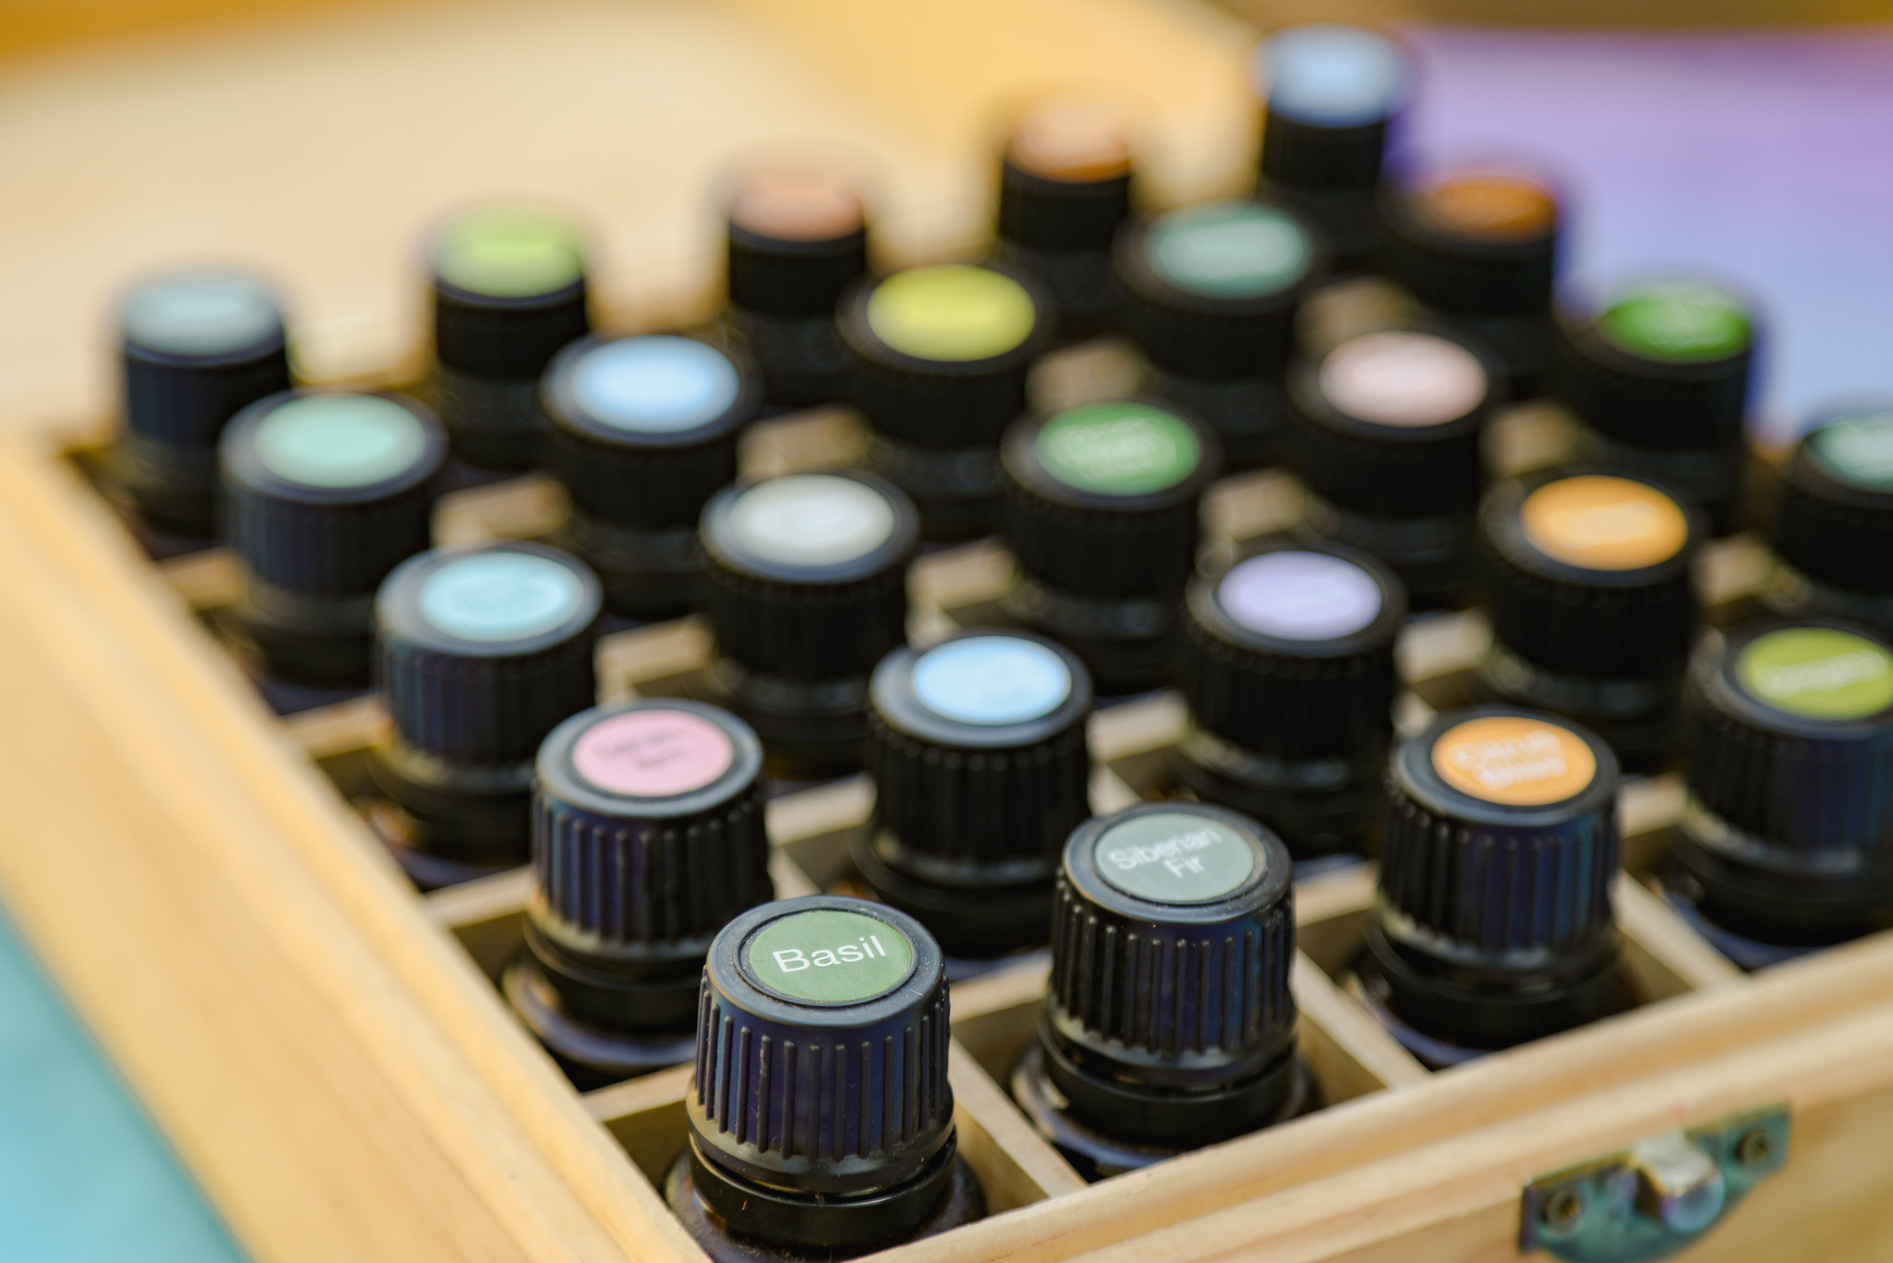 Top-down View of Essential Oil Bottles in Wooden Storage Box with Colorful Cap Stickers